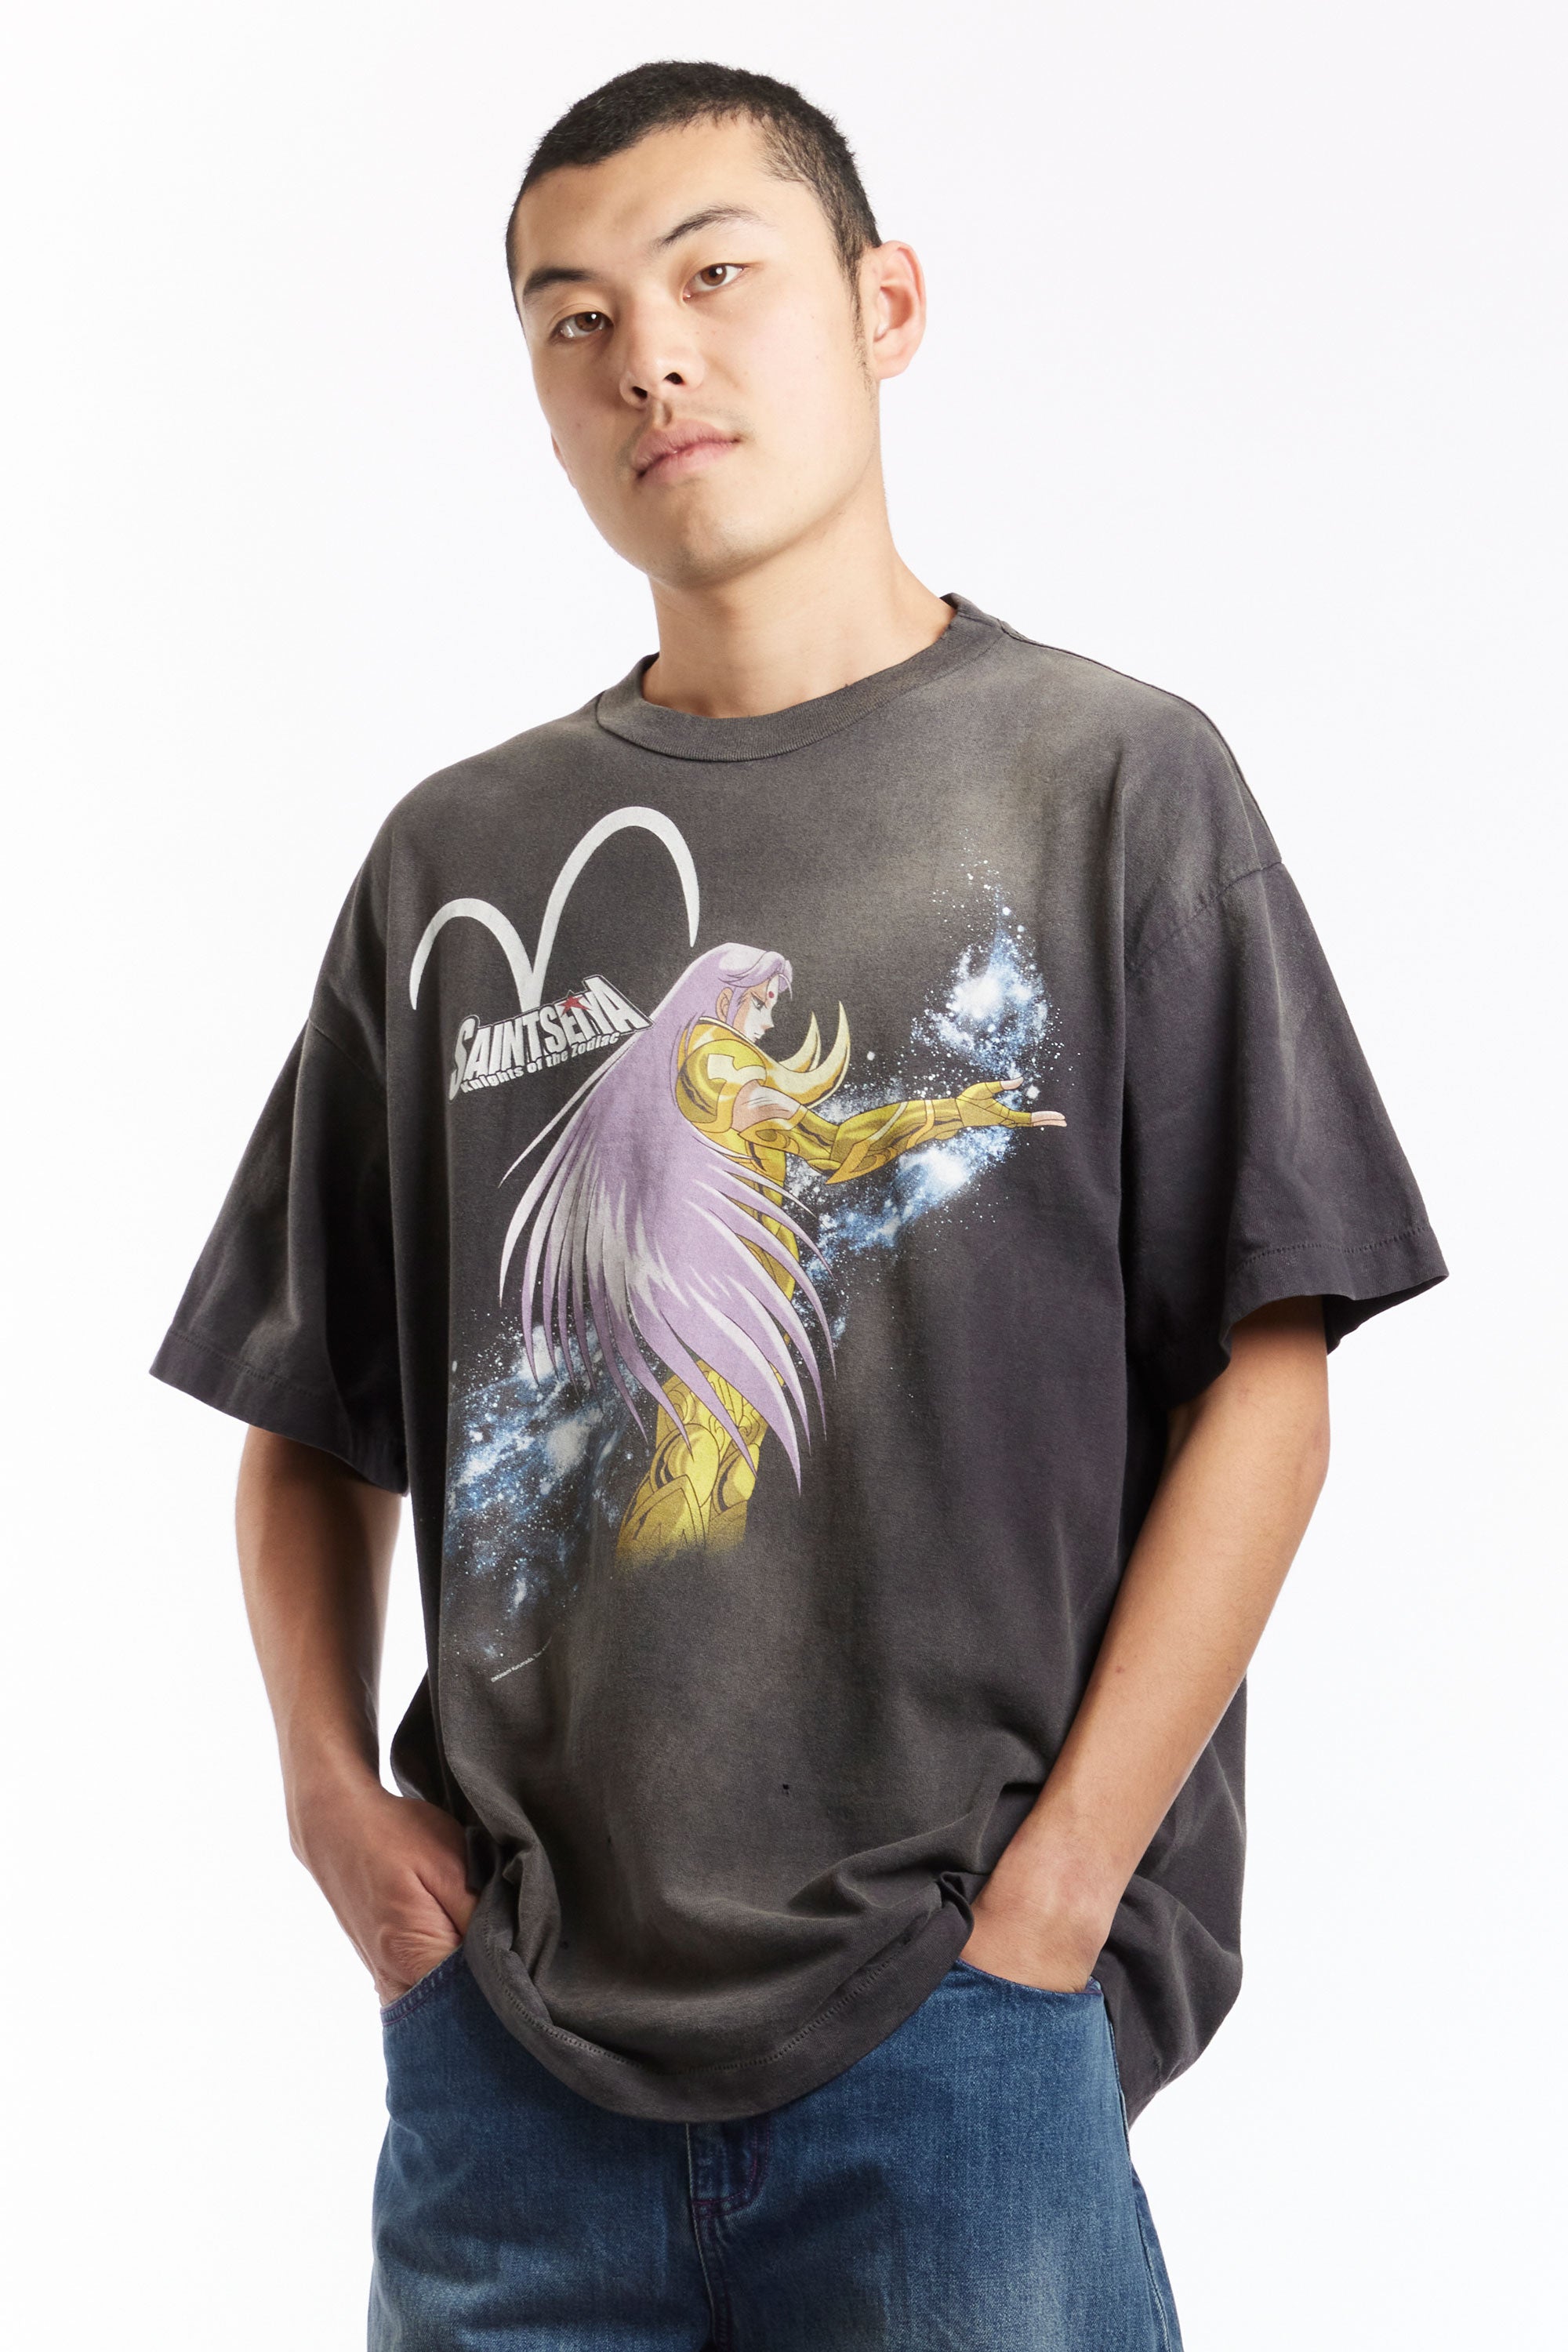 The ST MXXXXXX - SAINT SEIYA ATHENA SS TEE  available online with global shipping, and in PAM Stores Melbourne and Sydney.